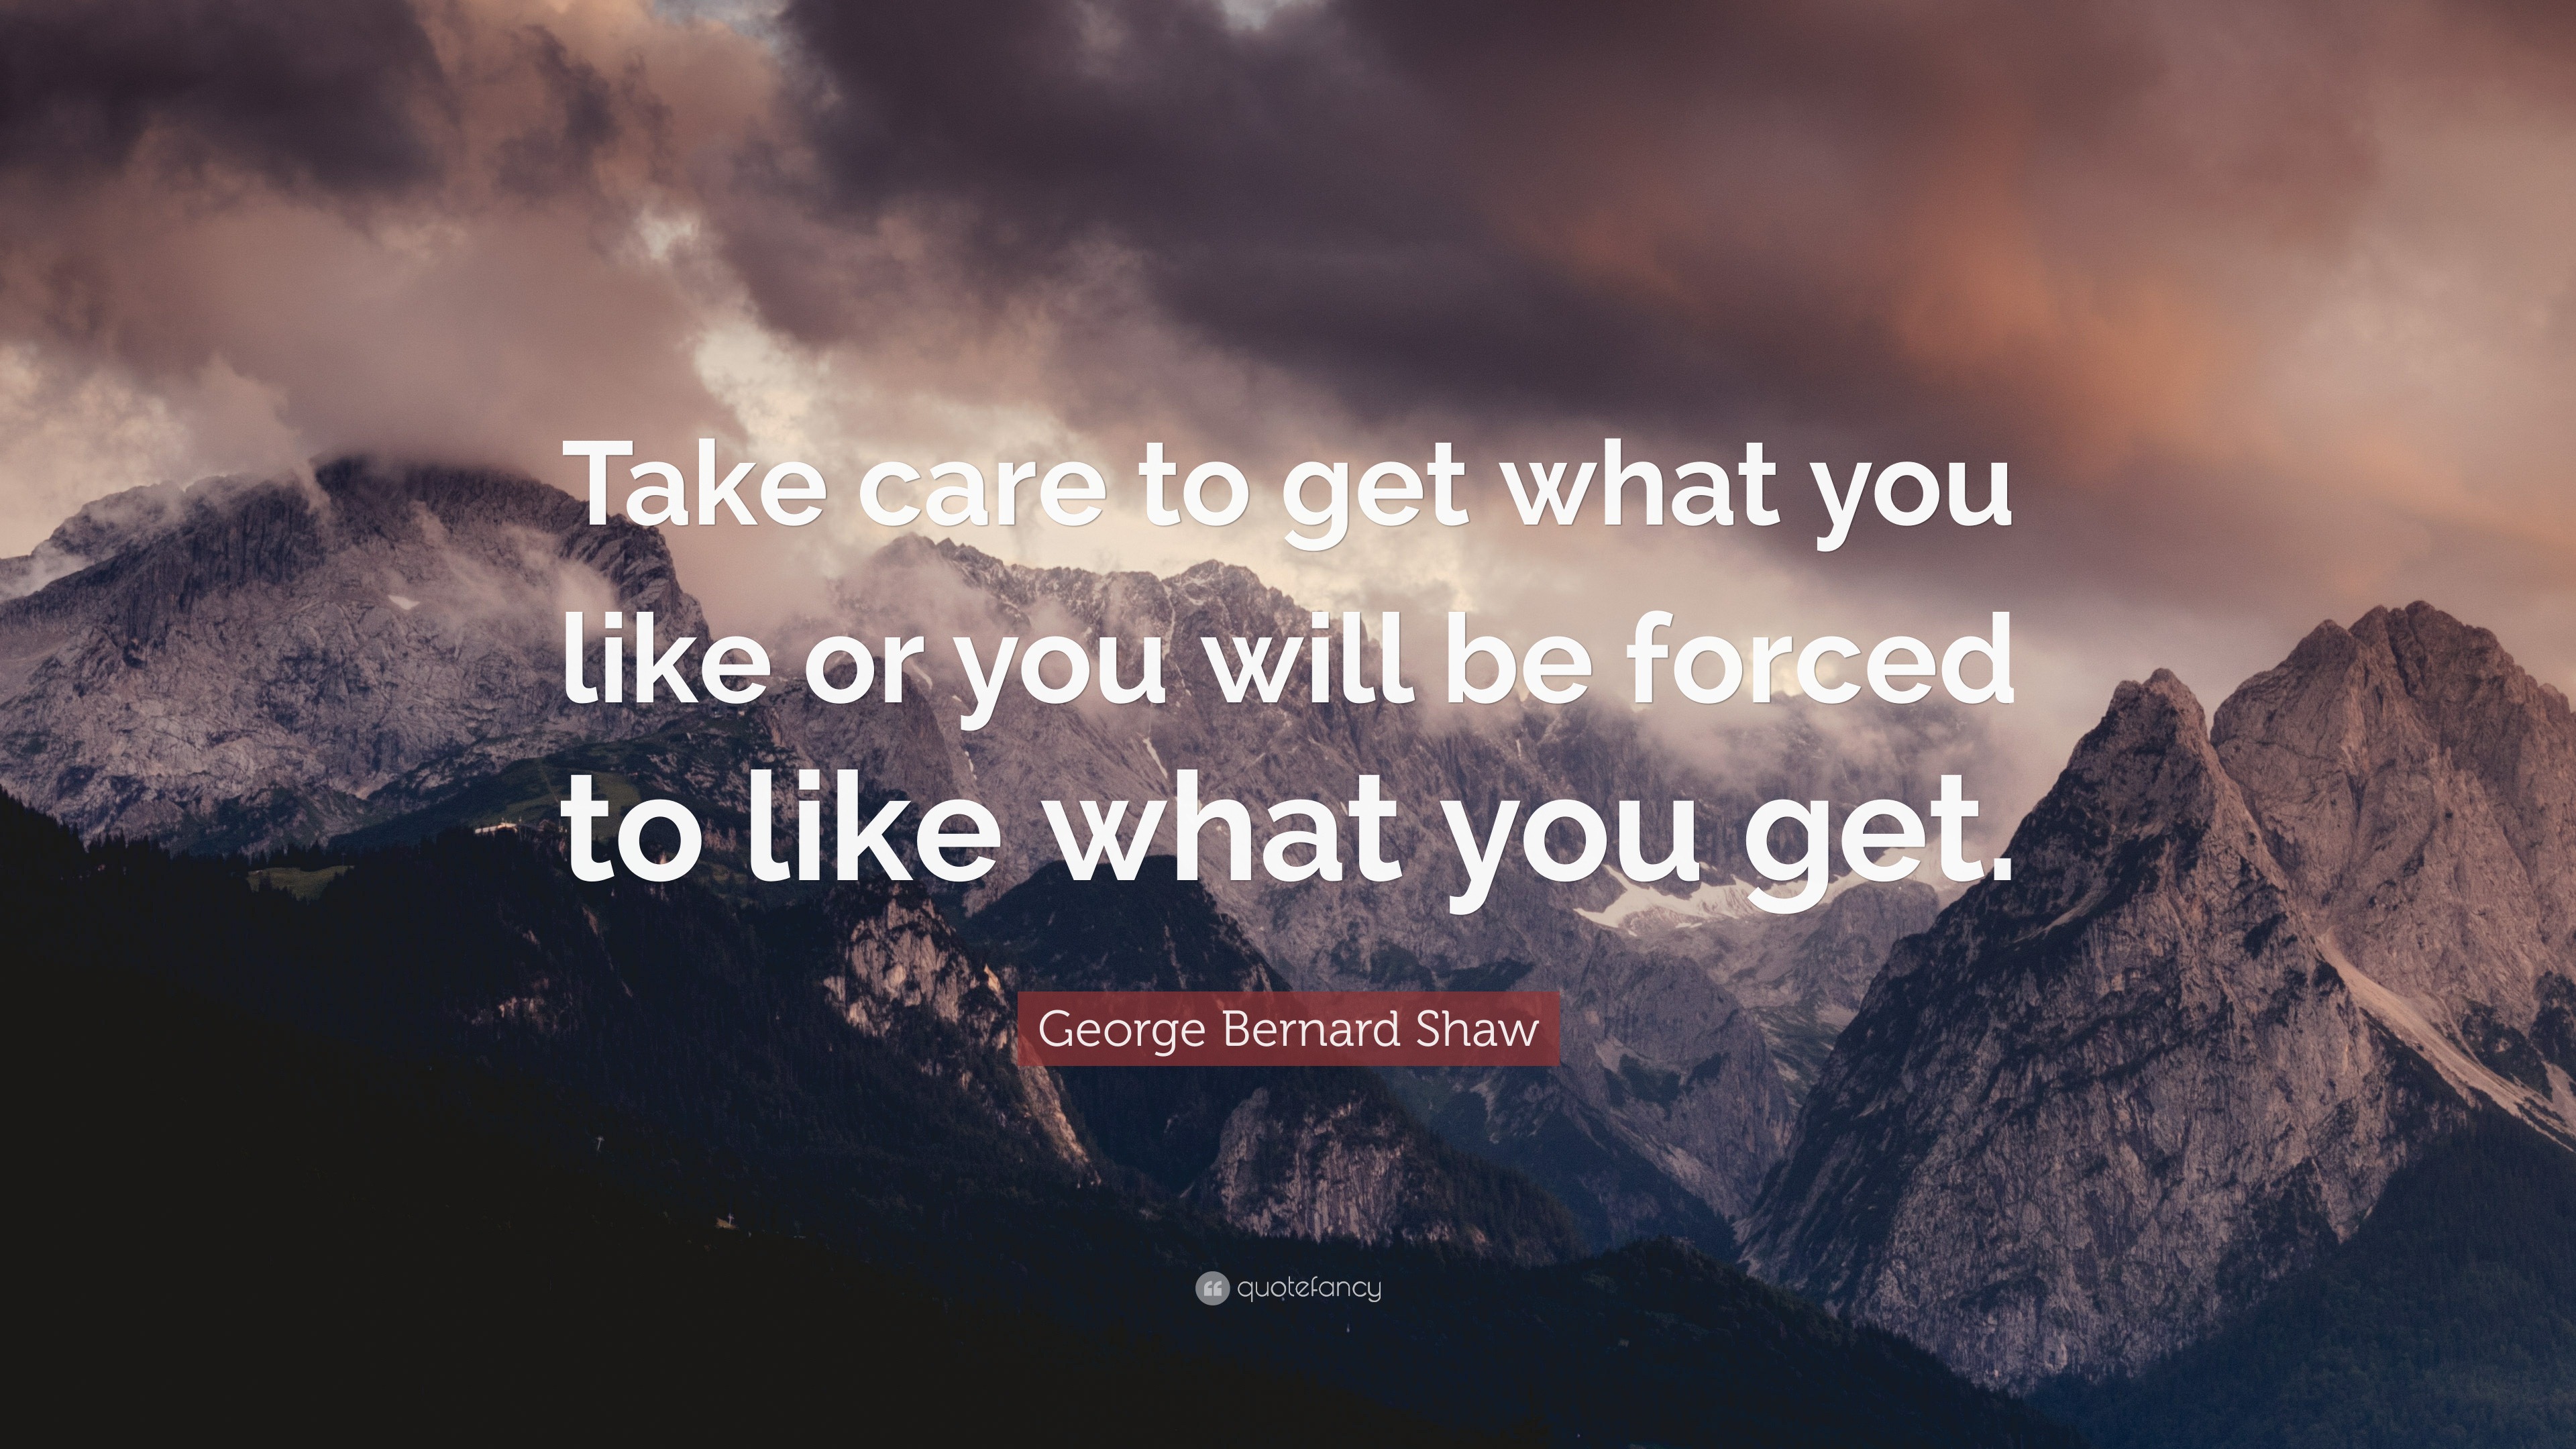 take care to get what you like or you will